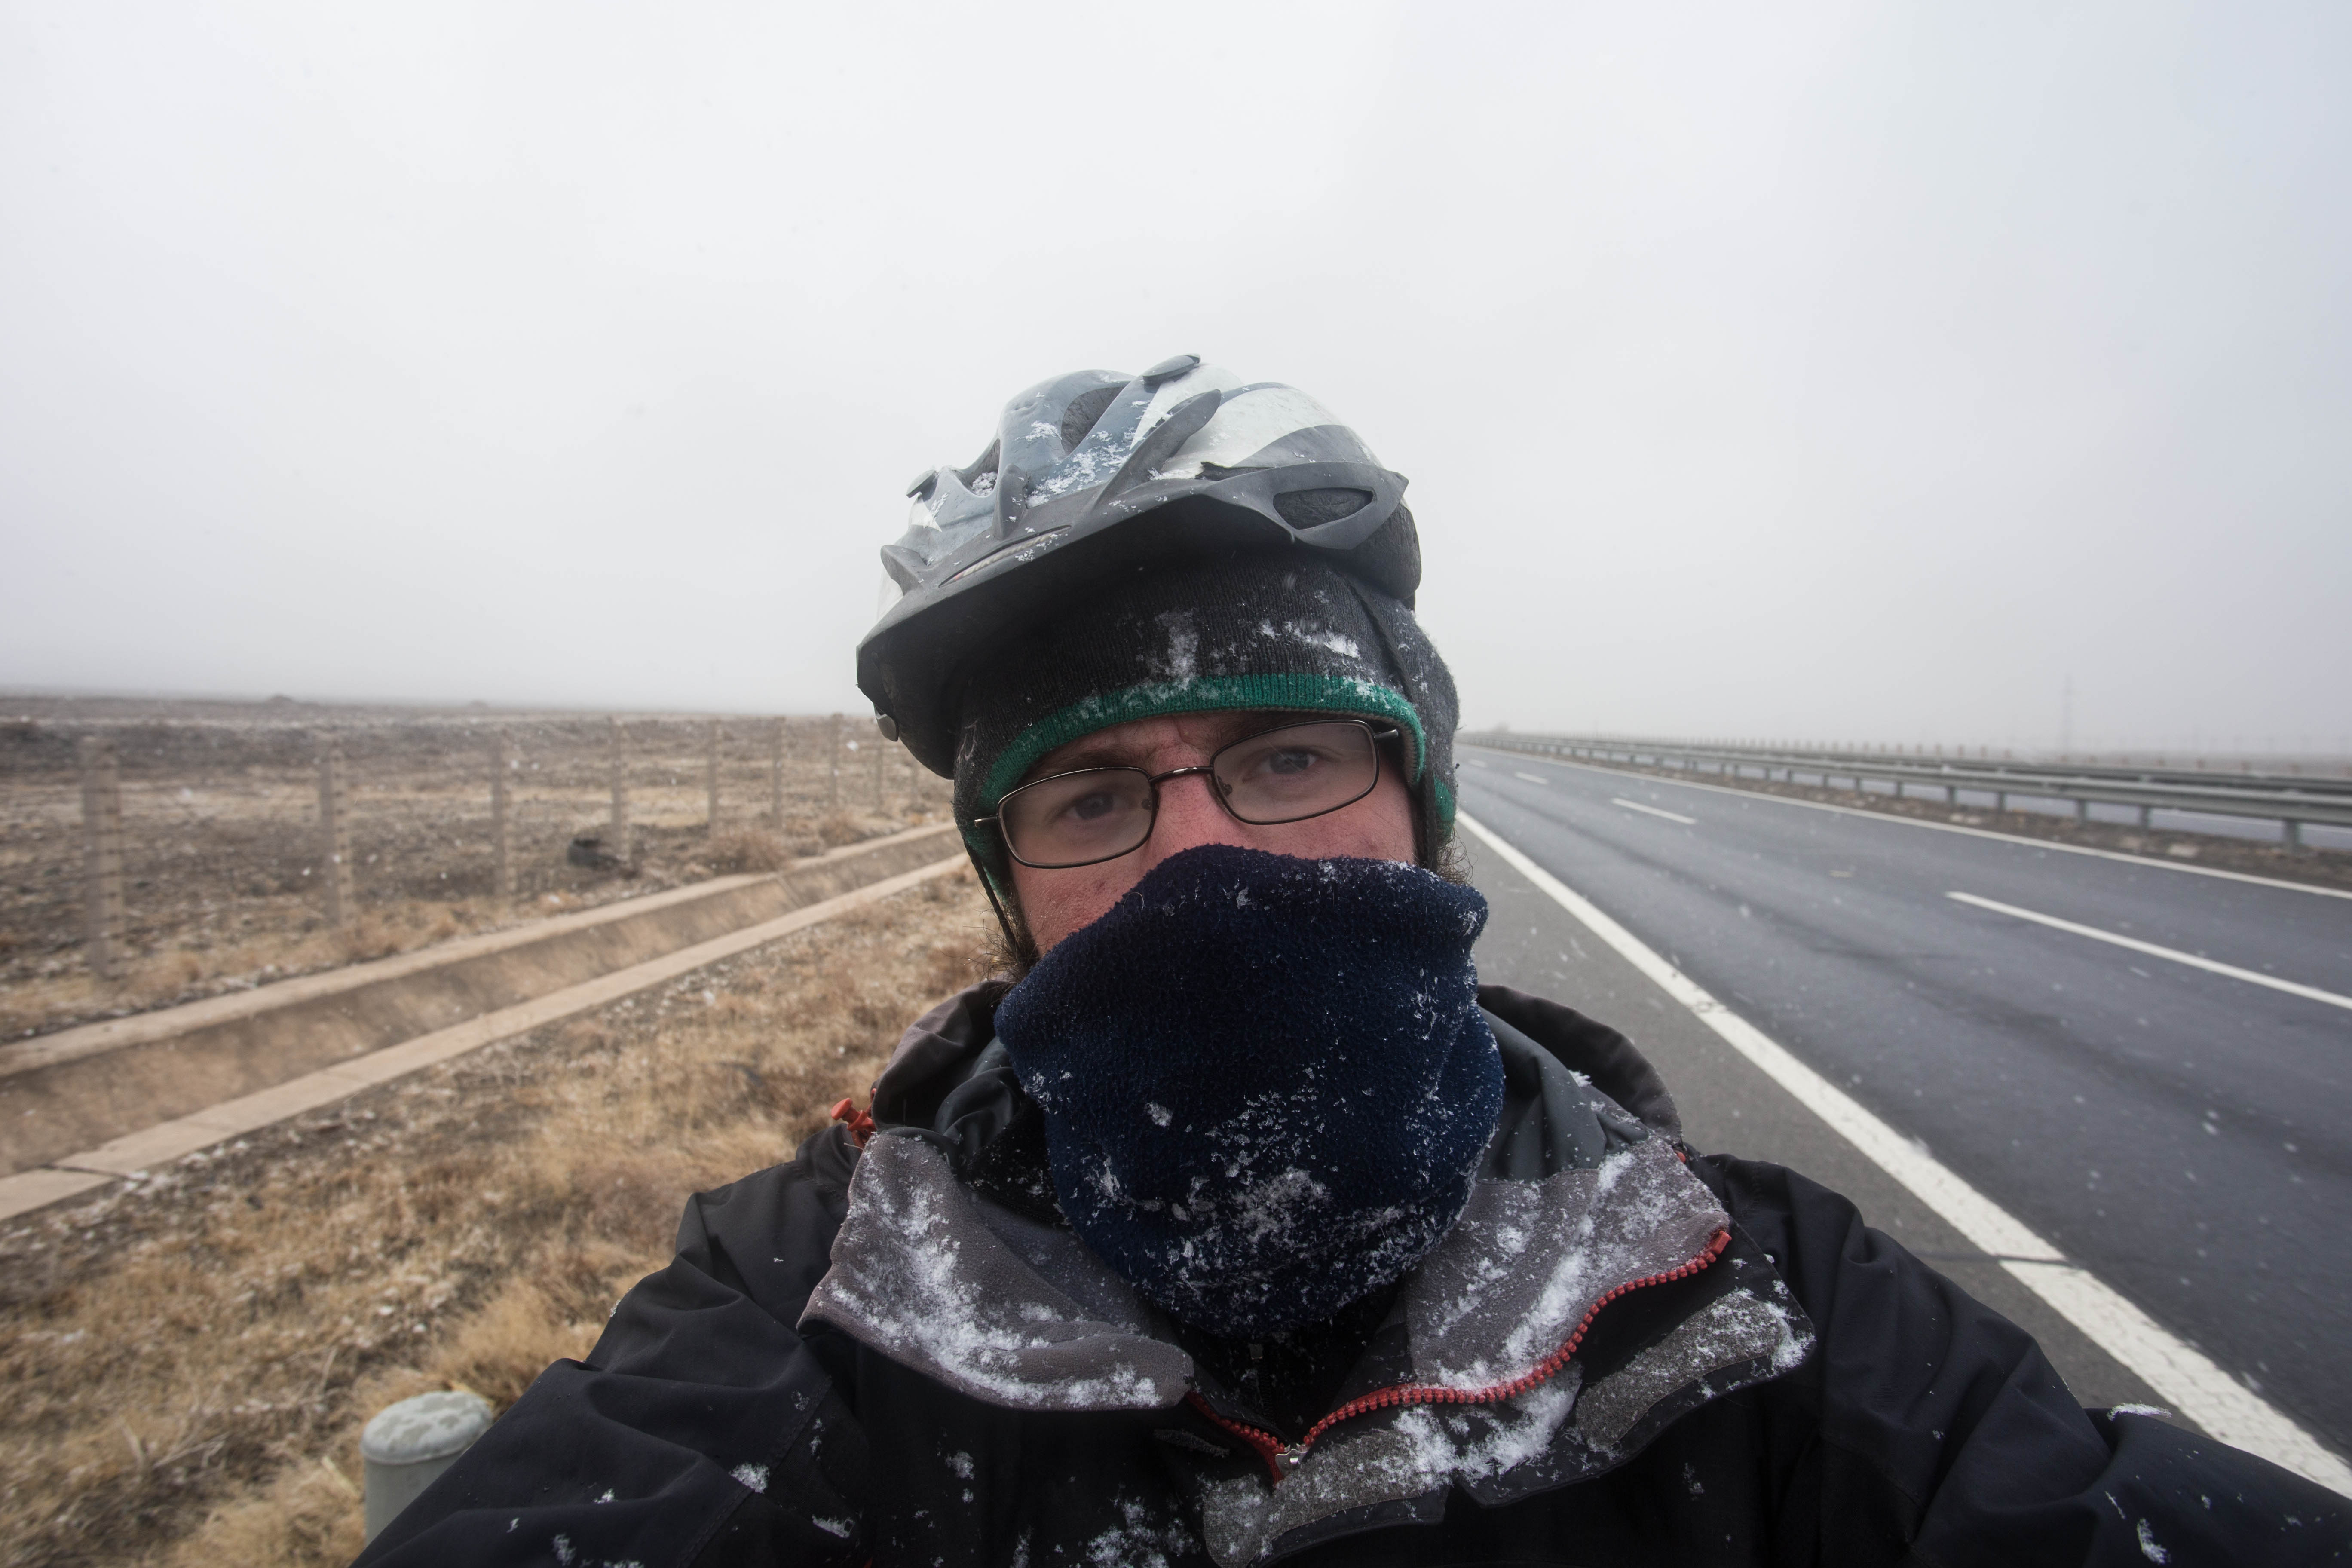 Briefly breaking my no selfie rule to show how much fun winter cycling on the G30 was! At this point there was a cold headwind blowing snow into my face.